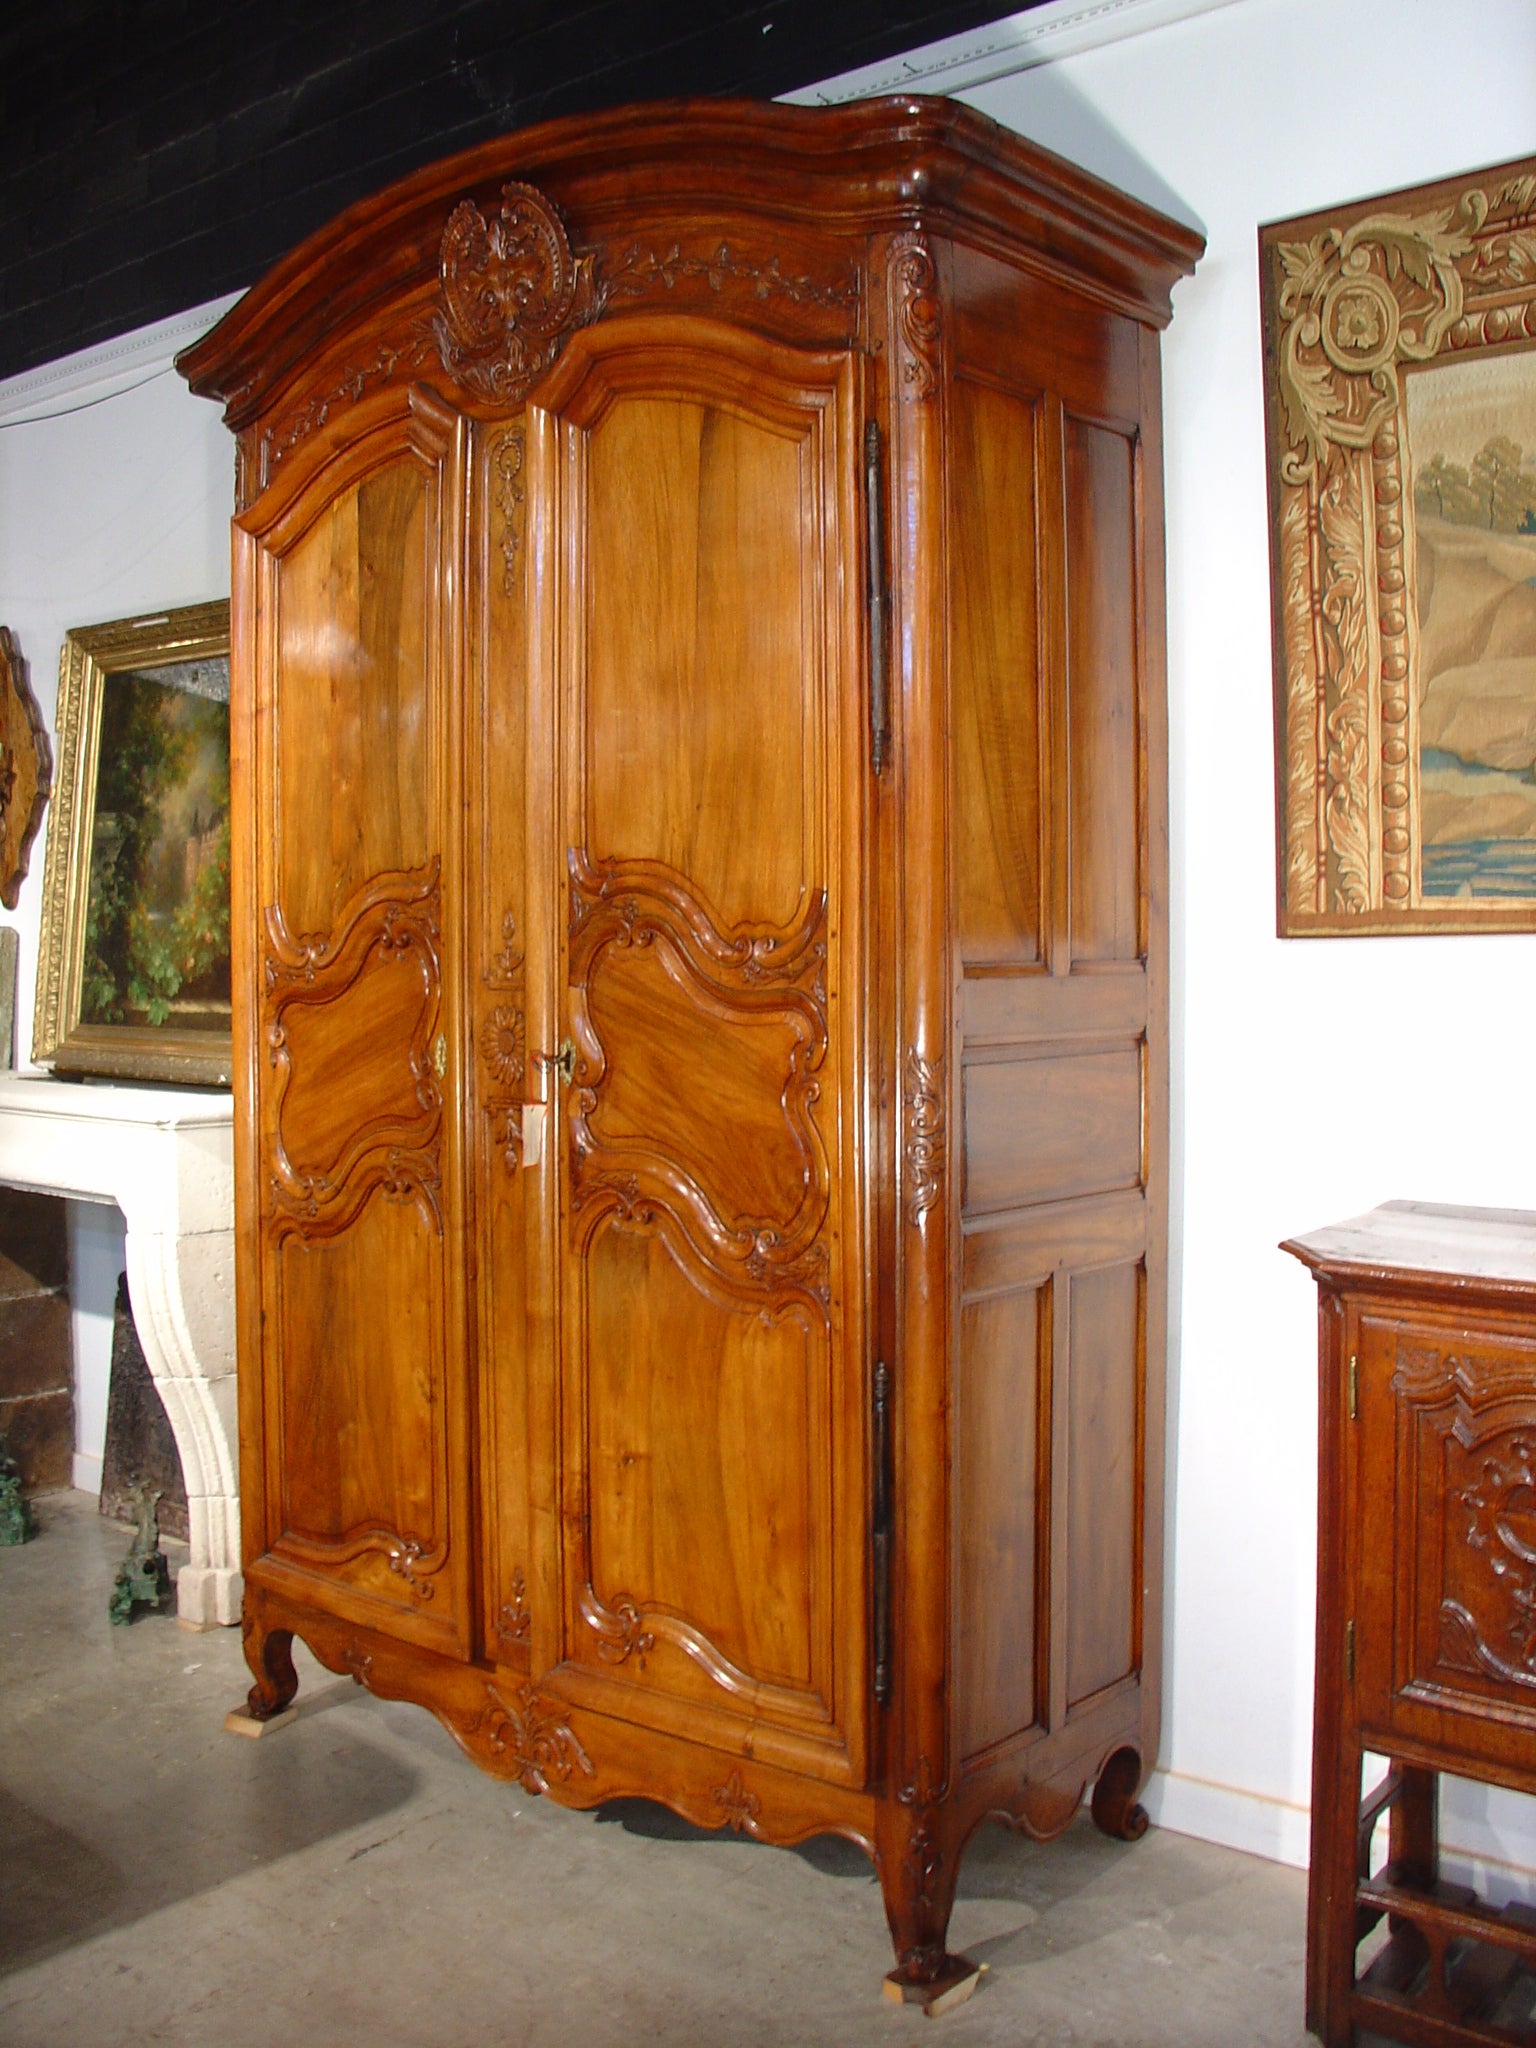 18th Century Walnut Wood Armoire from the Rhone Valley